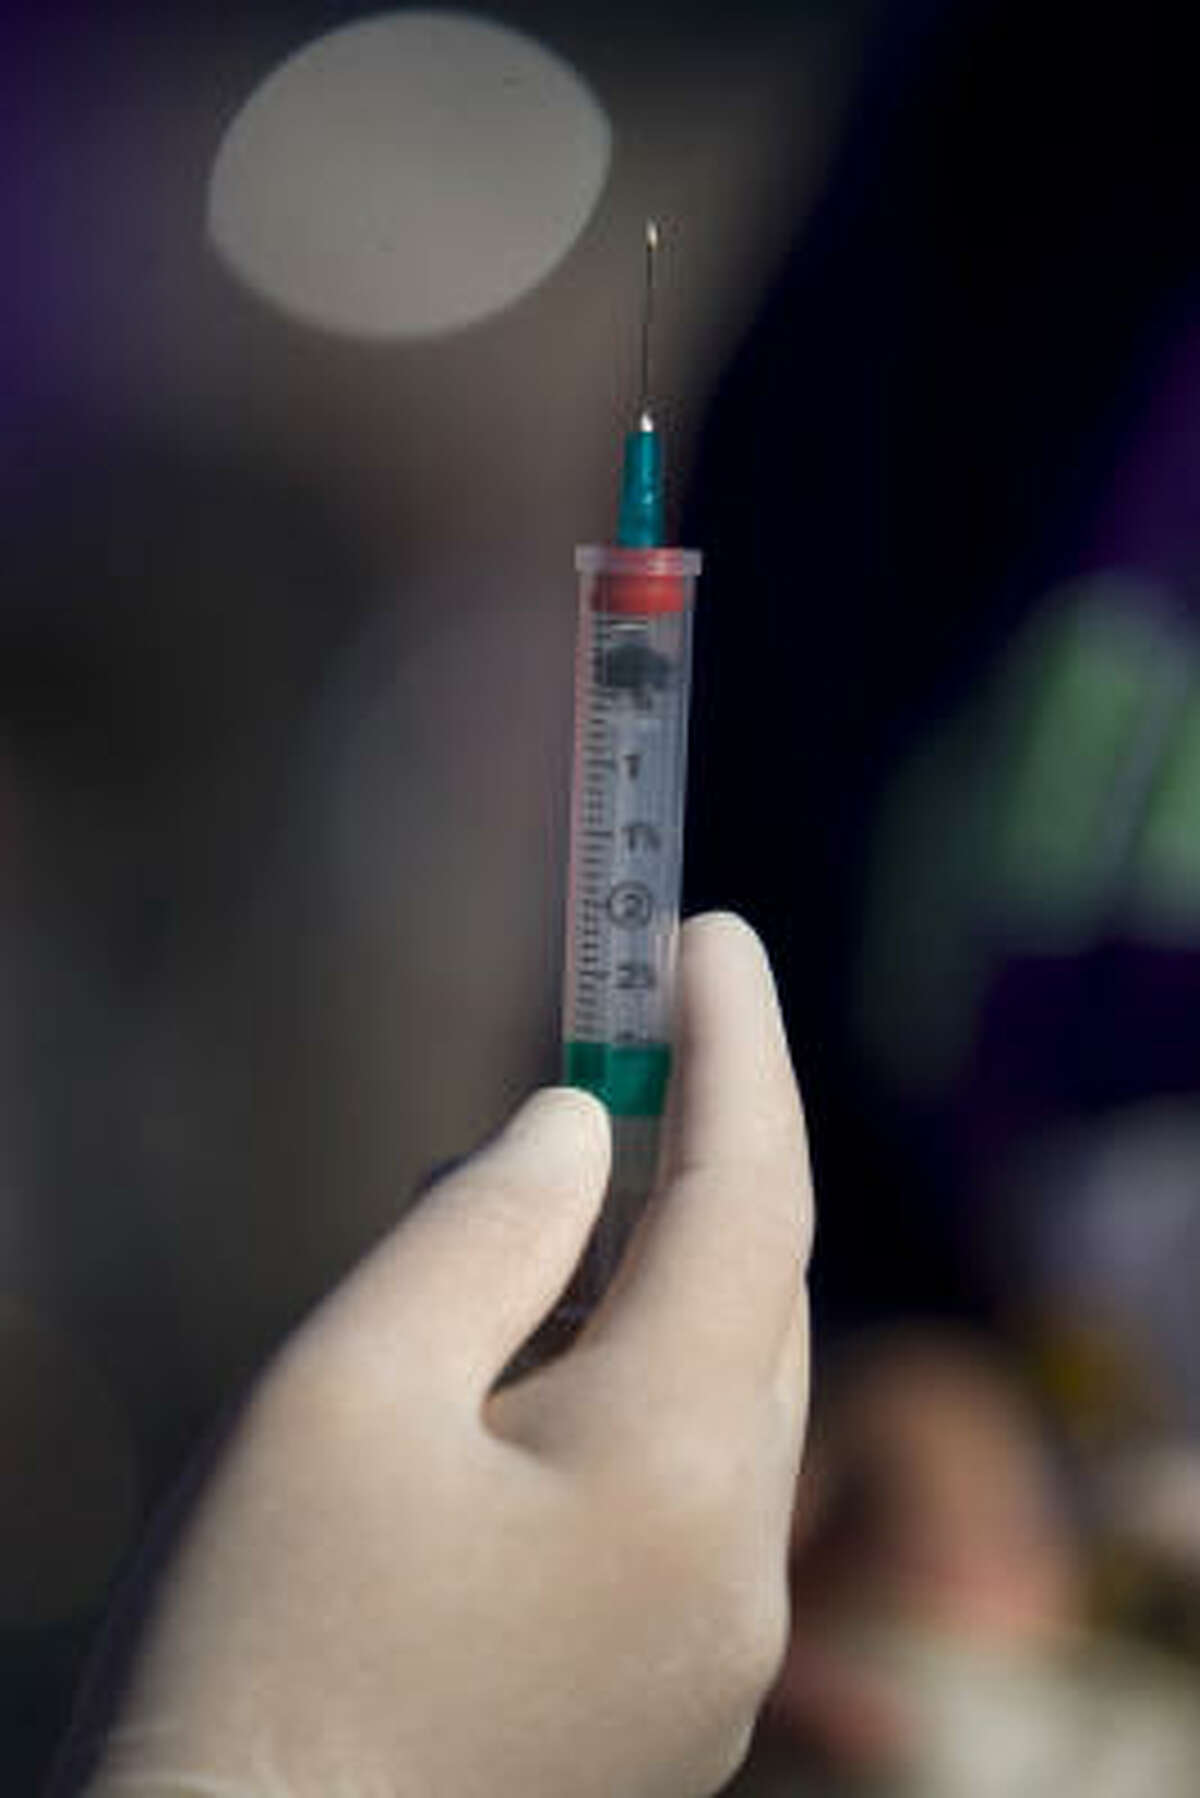 An H1N1 vaccine is prepared by a nurse as hundreds took part in the Montgomery County Health Department's annual drive-through flu shot clinic at the Lone Star College parking lot Saturday, Oct. 24, 2009